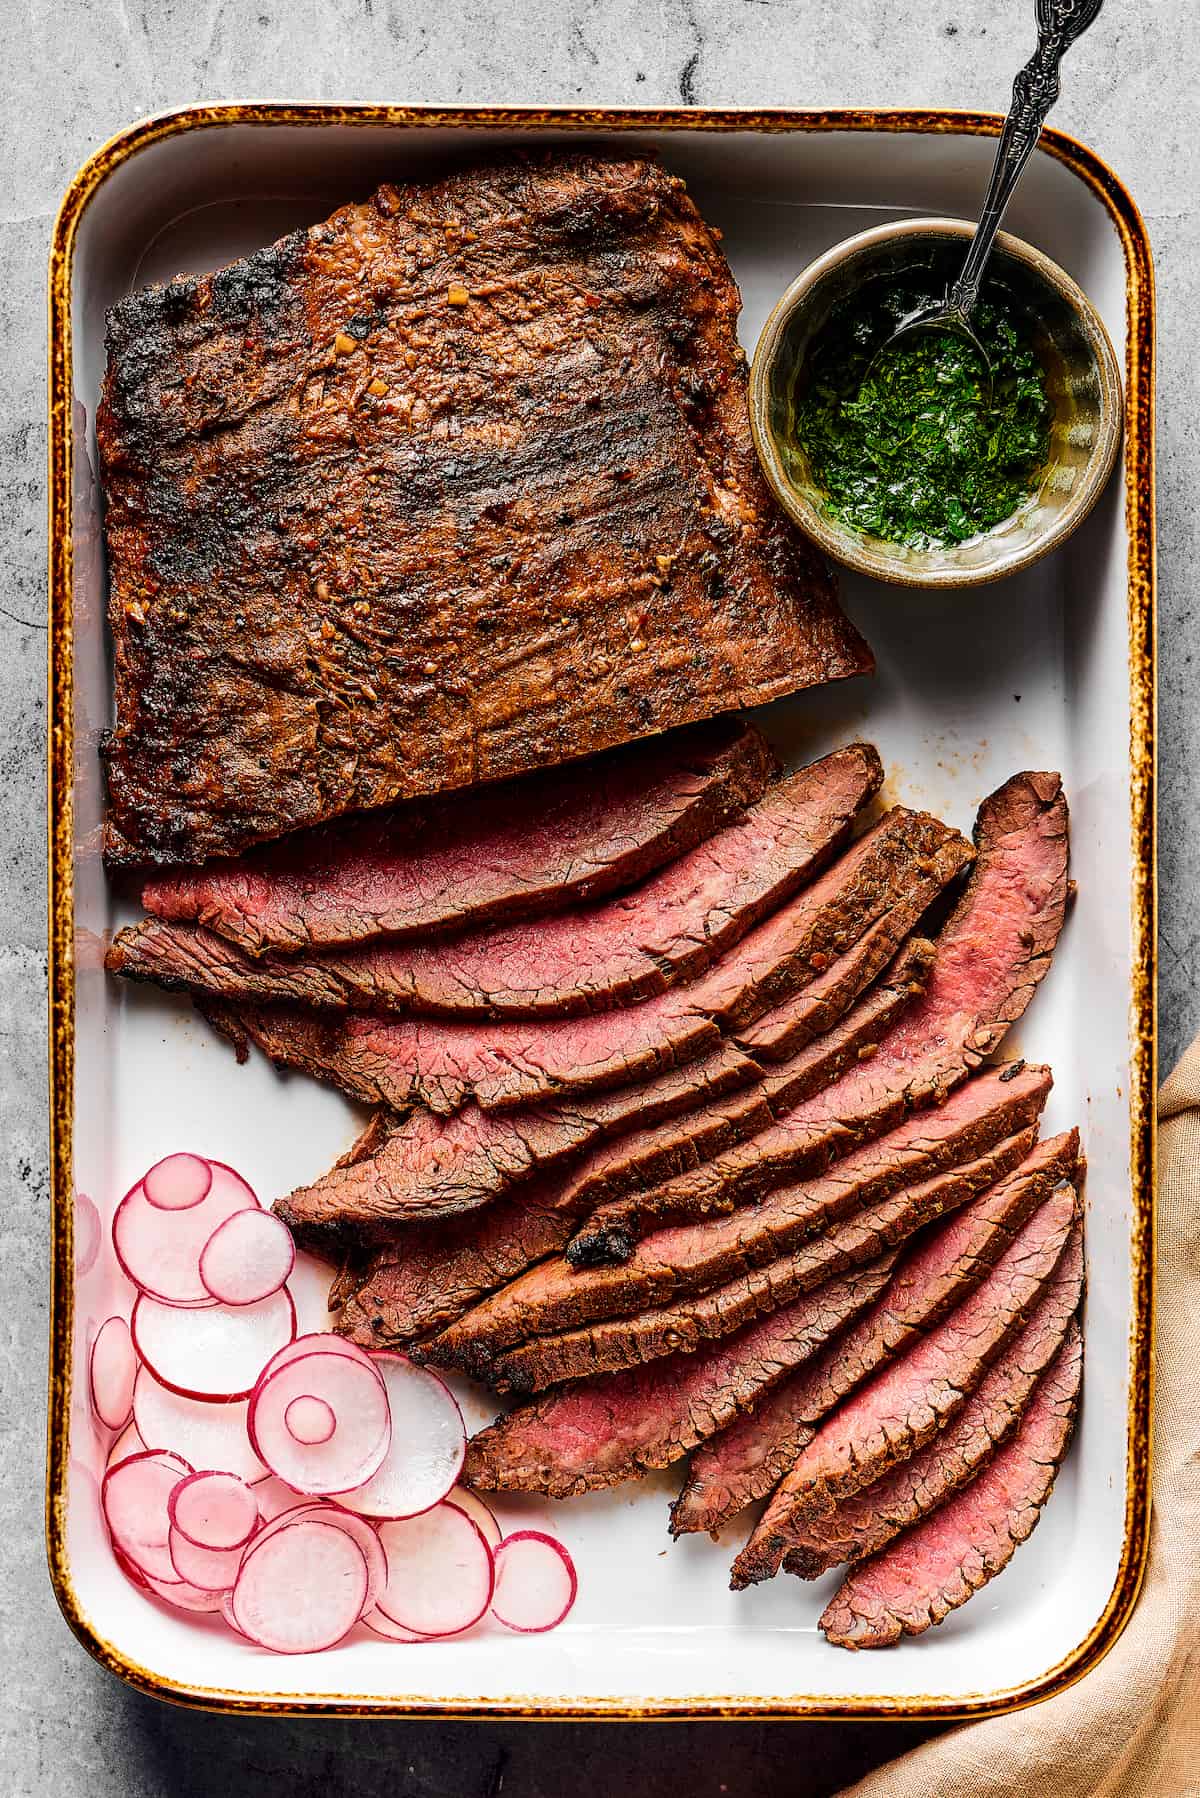 Grilled flank steak, partially sliced into thin strips, with a cup of dipping sauce on one side and a sliced radish on the other.